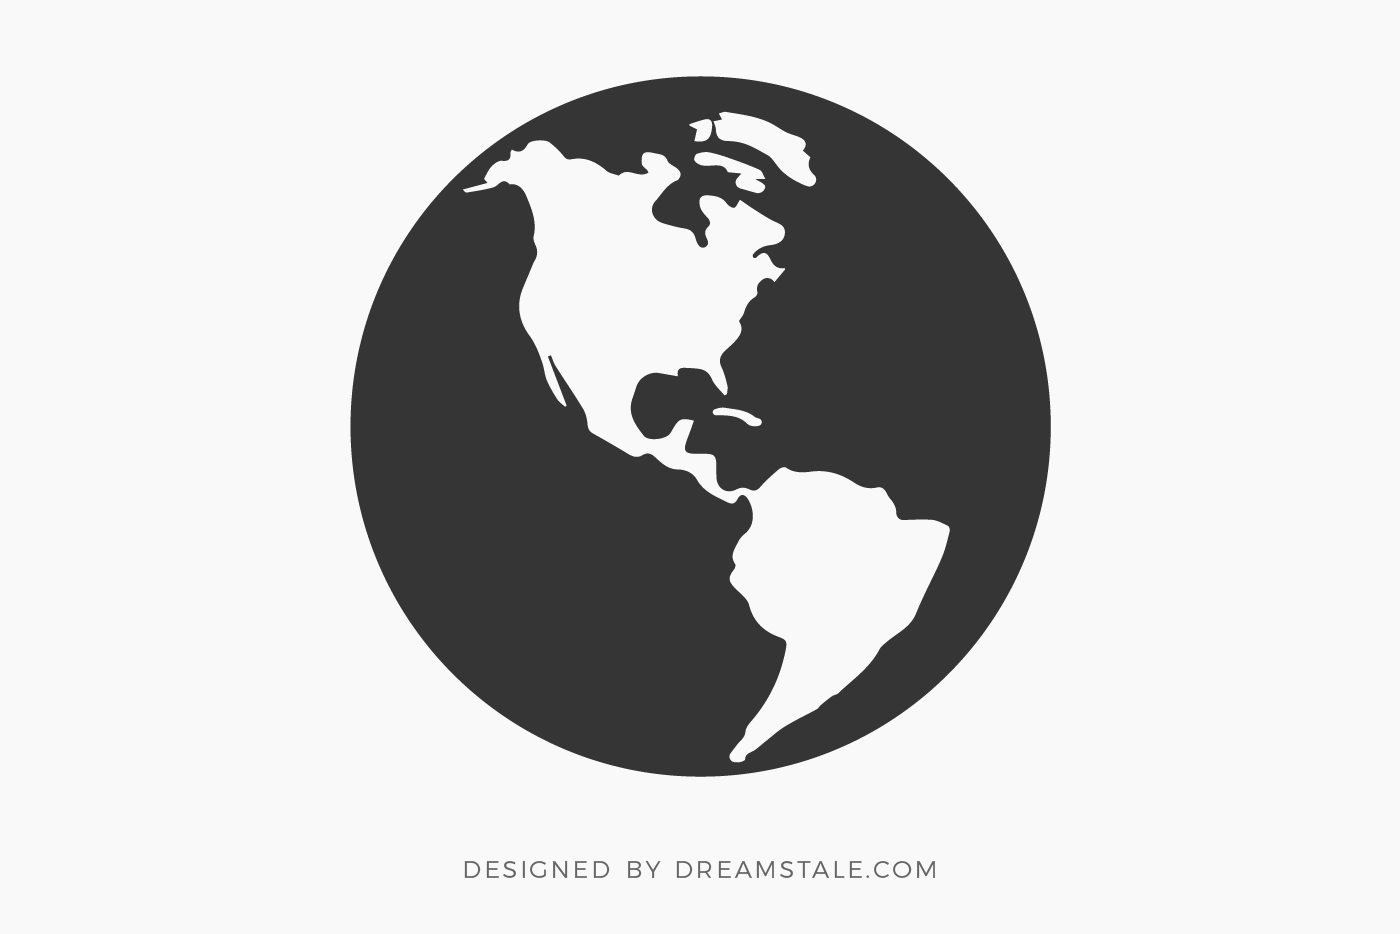 Download Free Svg Planet Earth Clipart Dreamstale